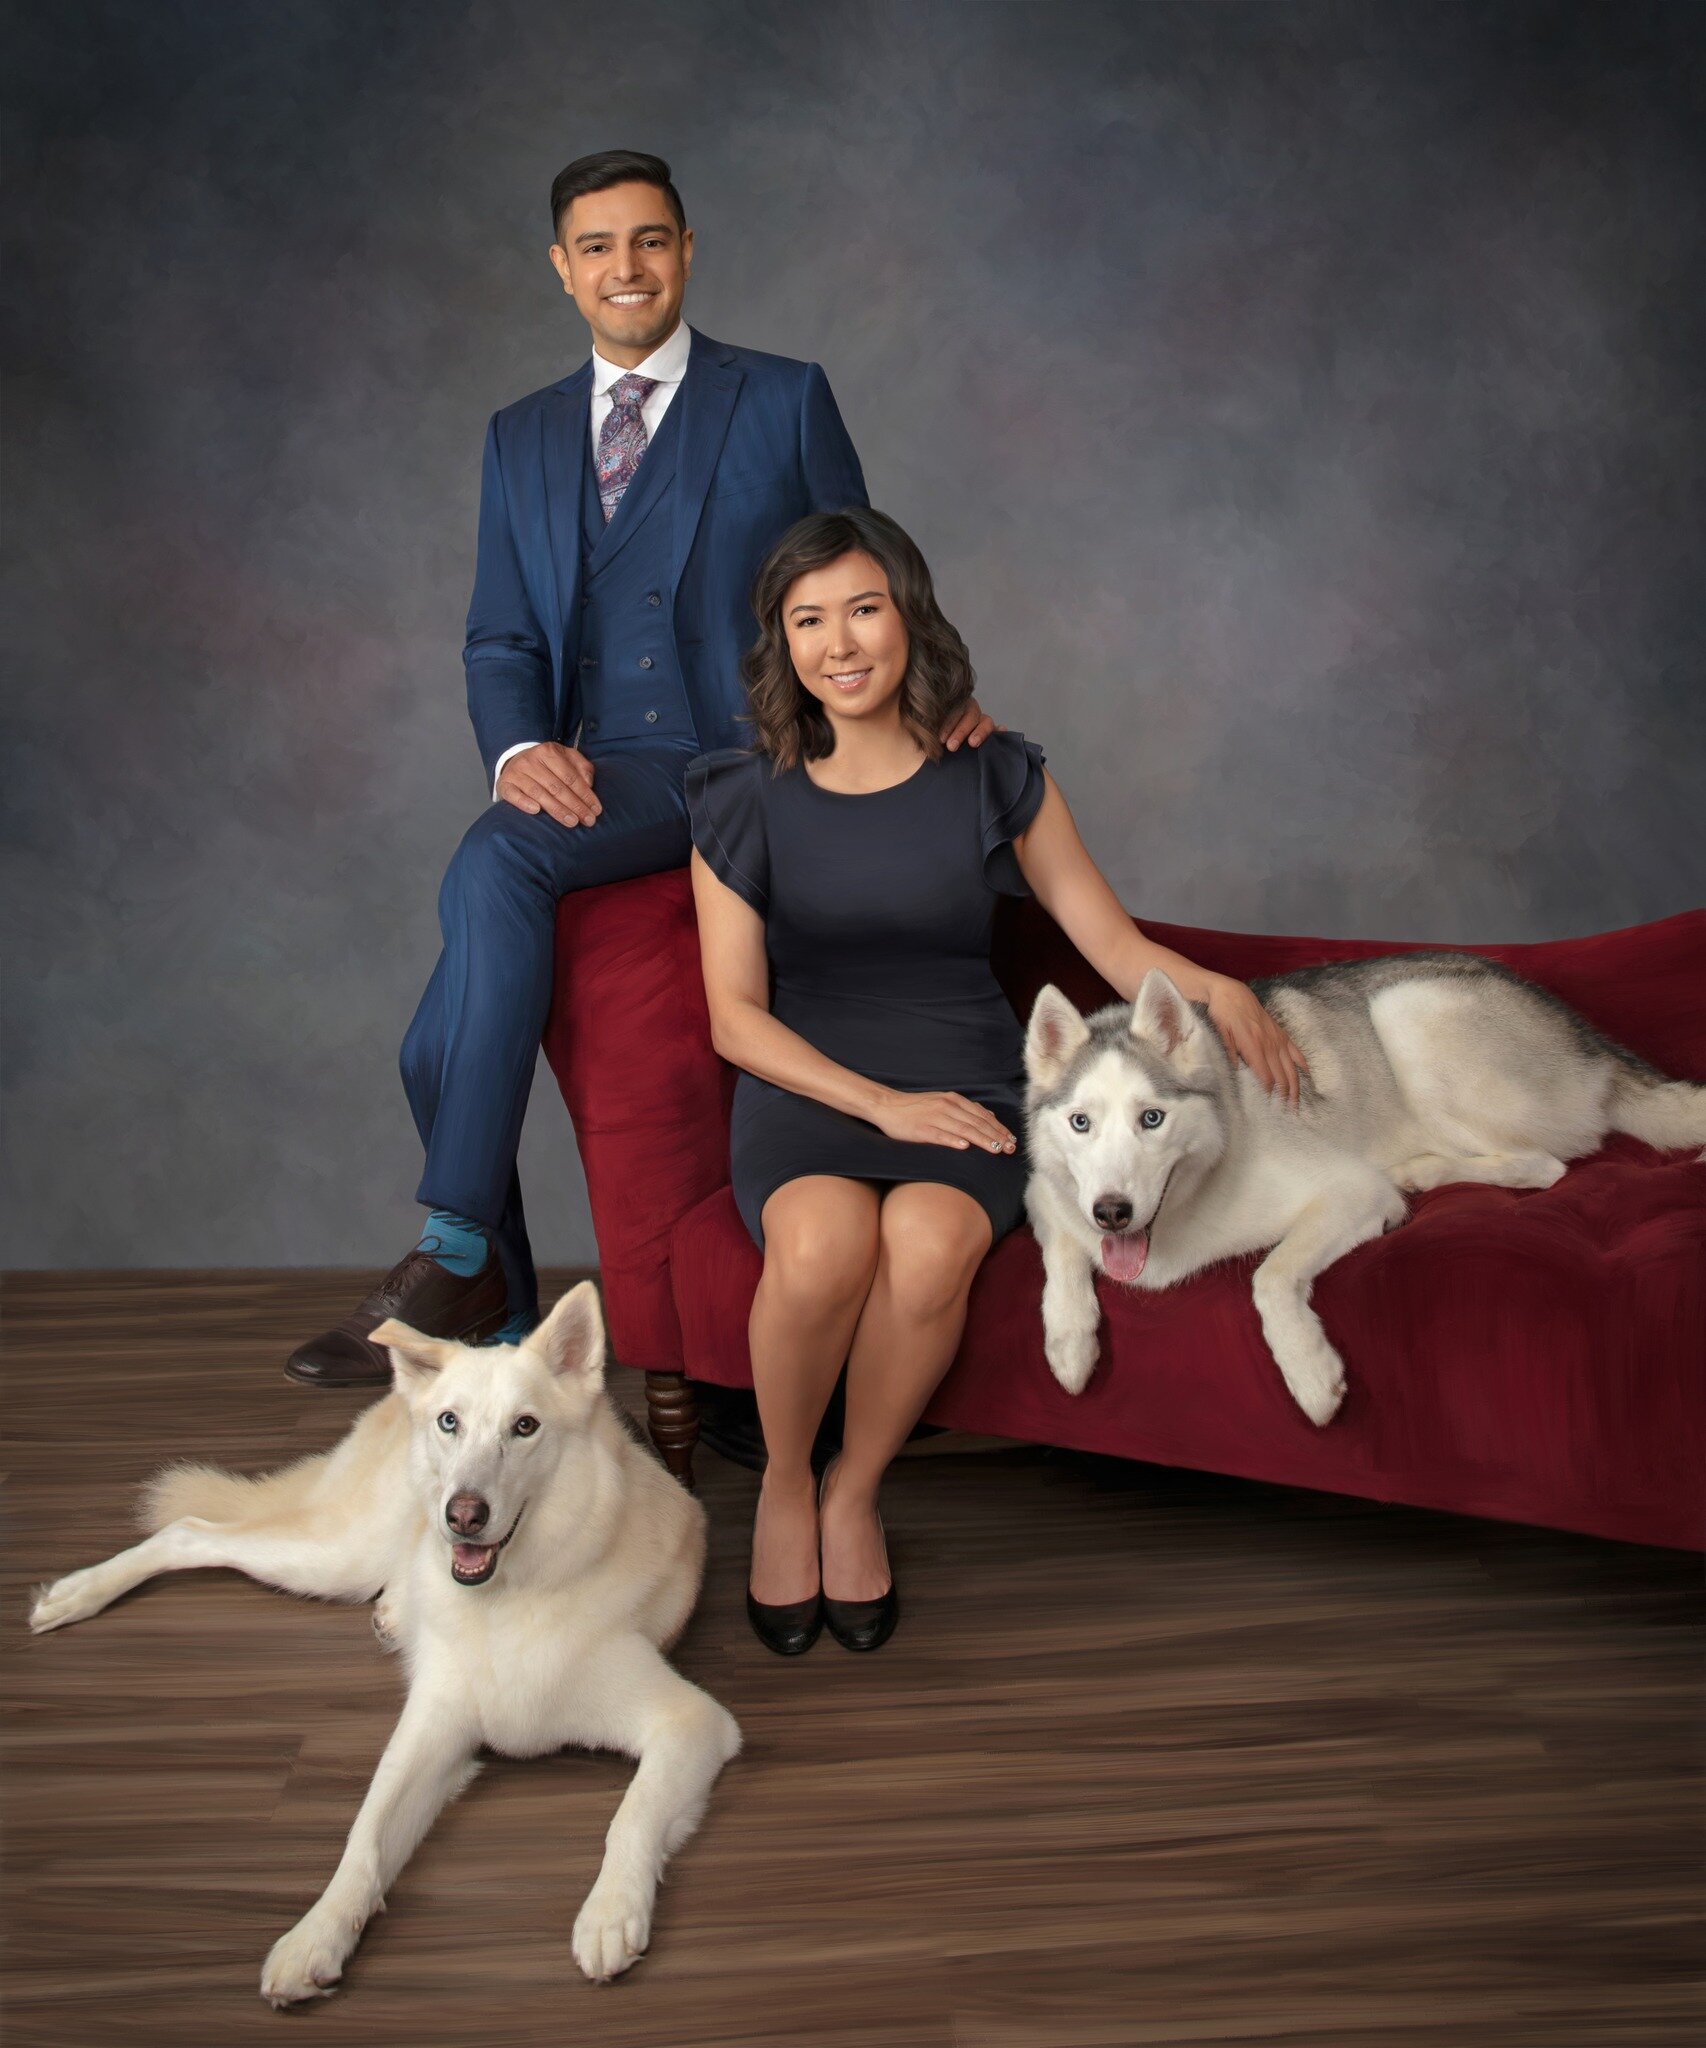 &quot;The bond with a true dog is as lasting as the ties of this earth will ever be.&quot;
-Konrad Lorenz

#dogportraitartist #dogmomsofinstagram #dogmoments #jelizabethportraiture #santamonica #familyfirst #lovefamily #familyphotograph #familyisever